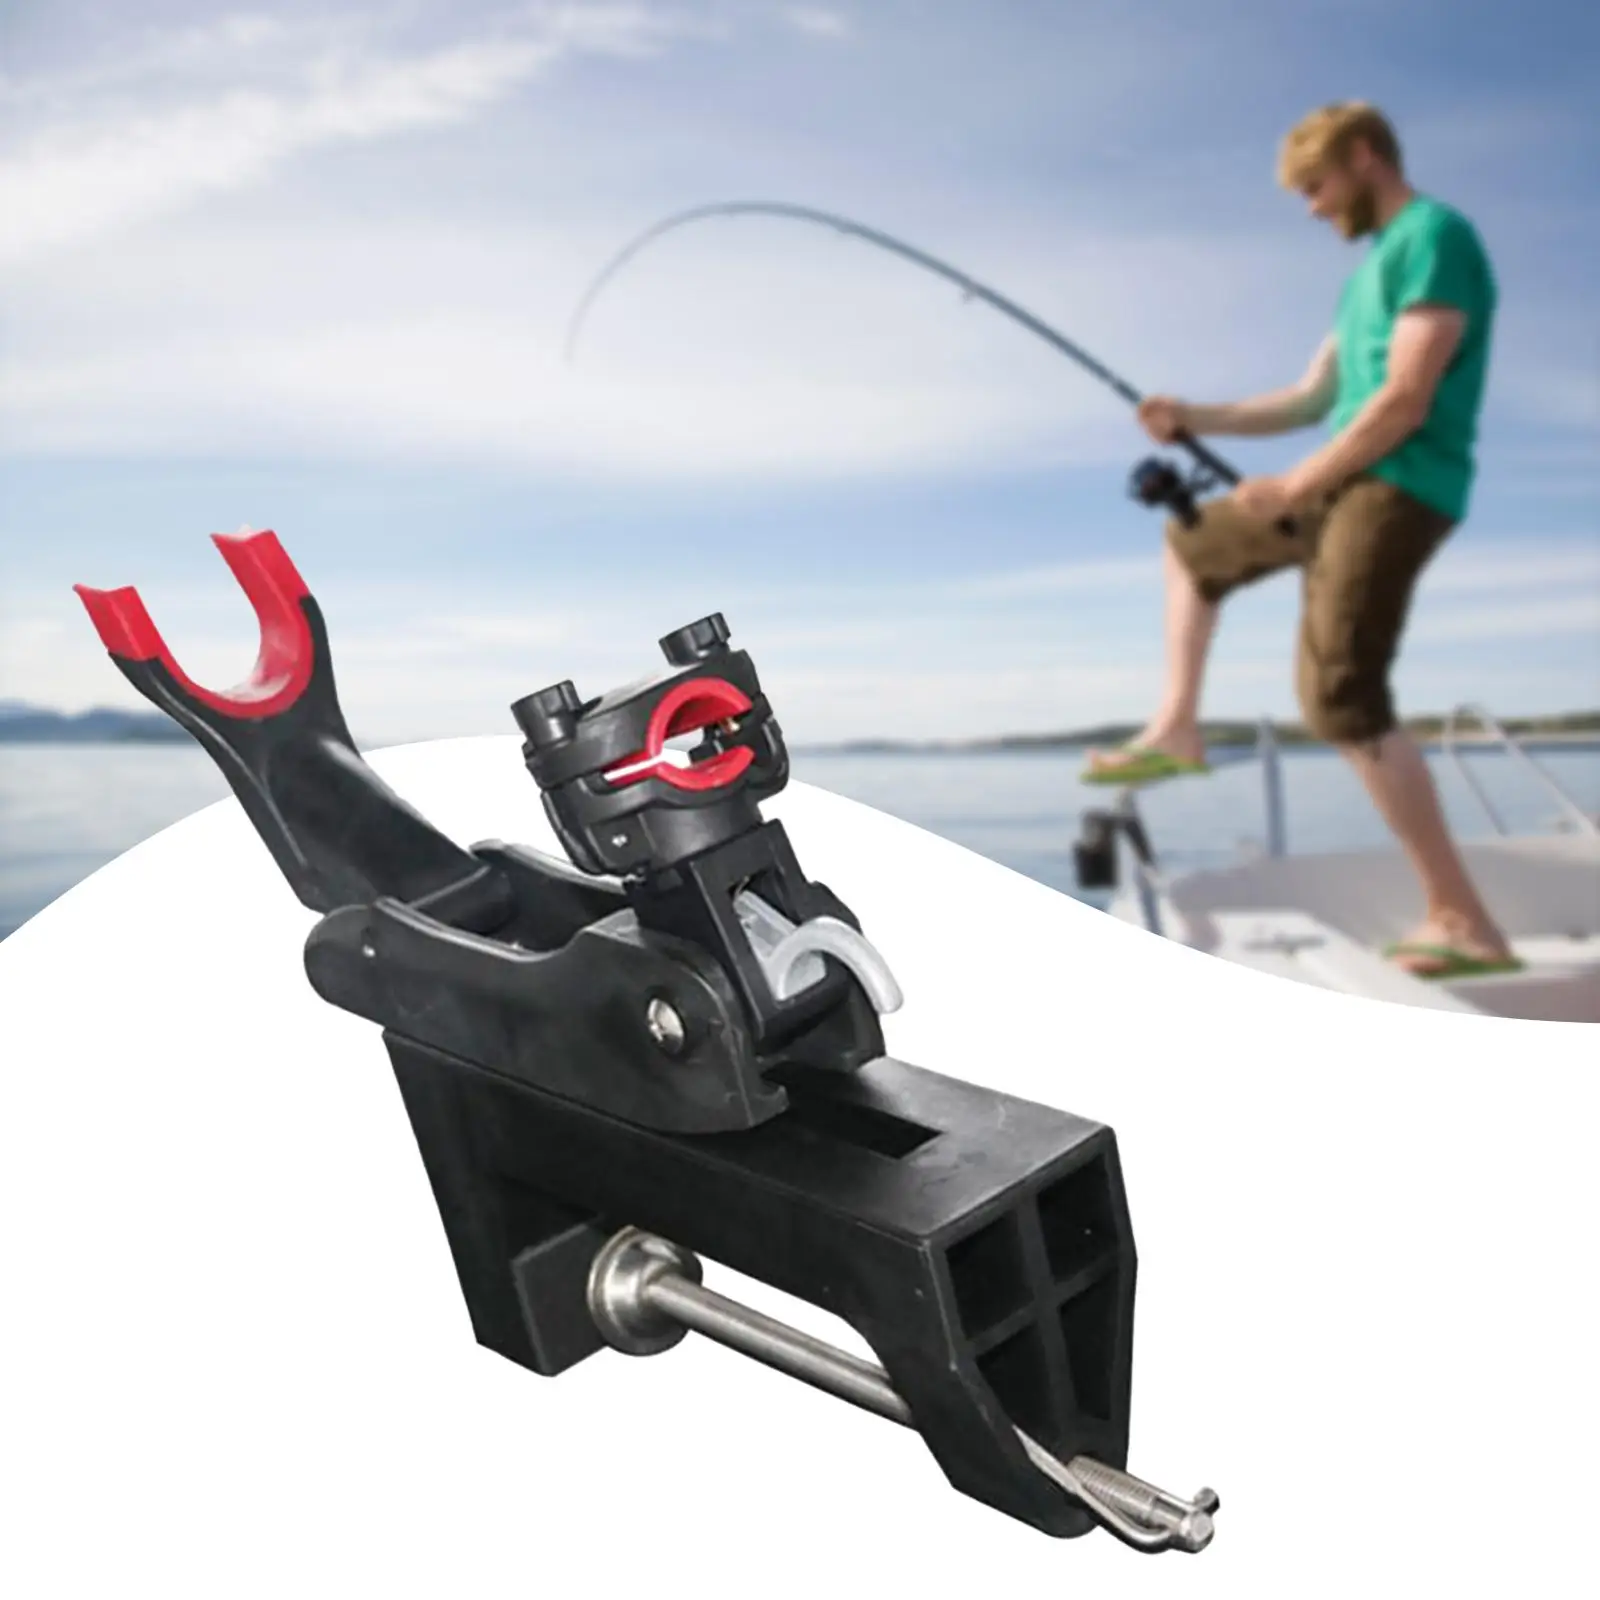 Fishing Rods Holder Accessories Professional Replace Large Clamp Opening Adjustable Boat Rod Bracket for Kayak Canoe Dock Yacht